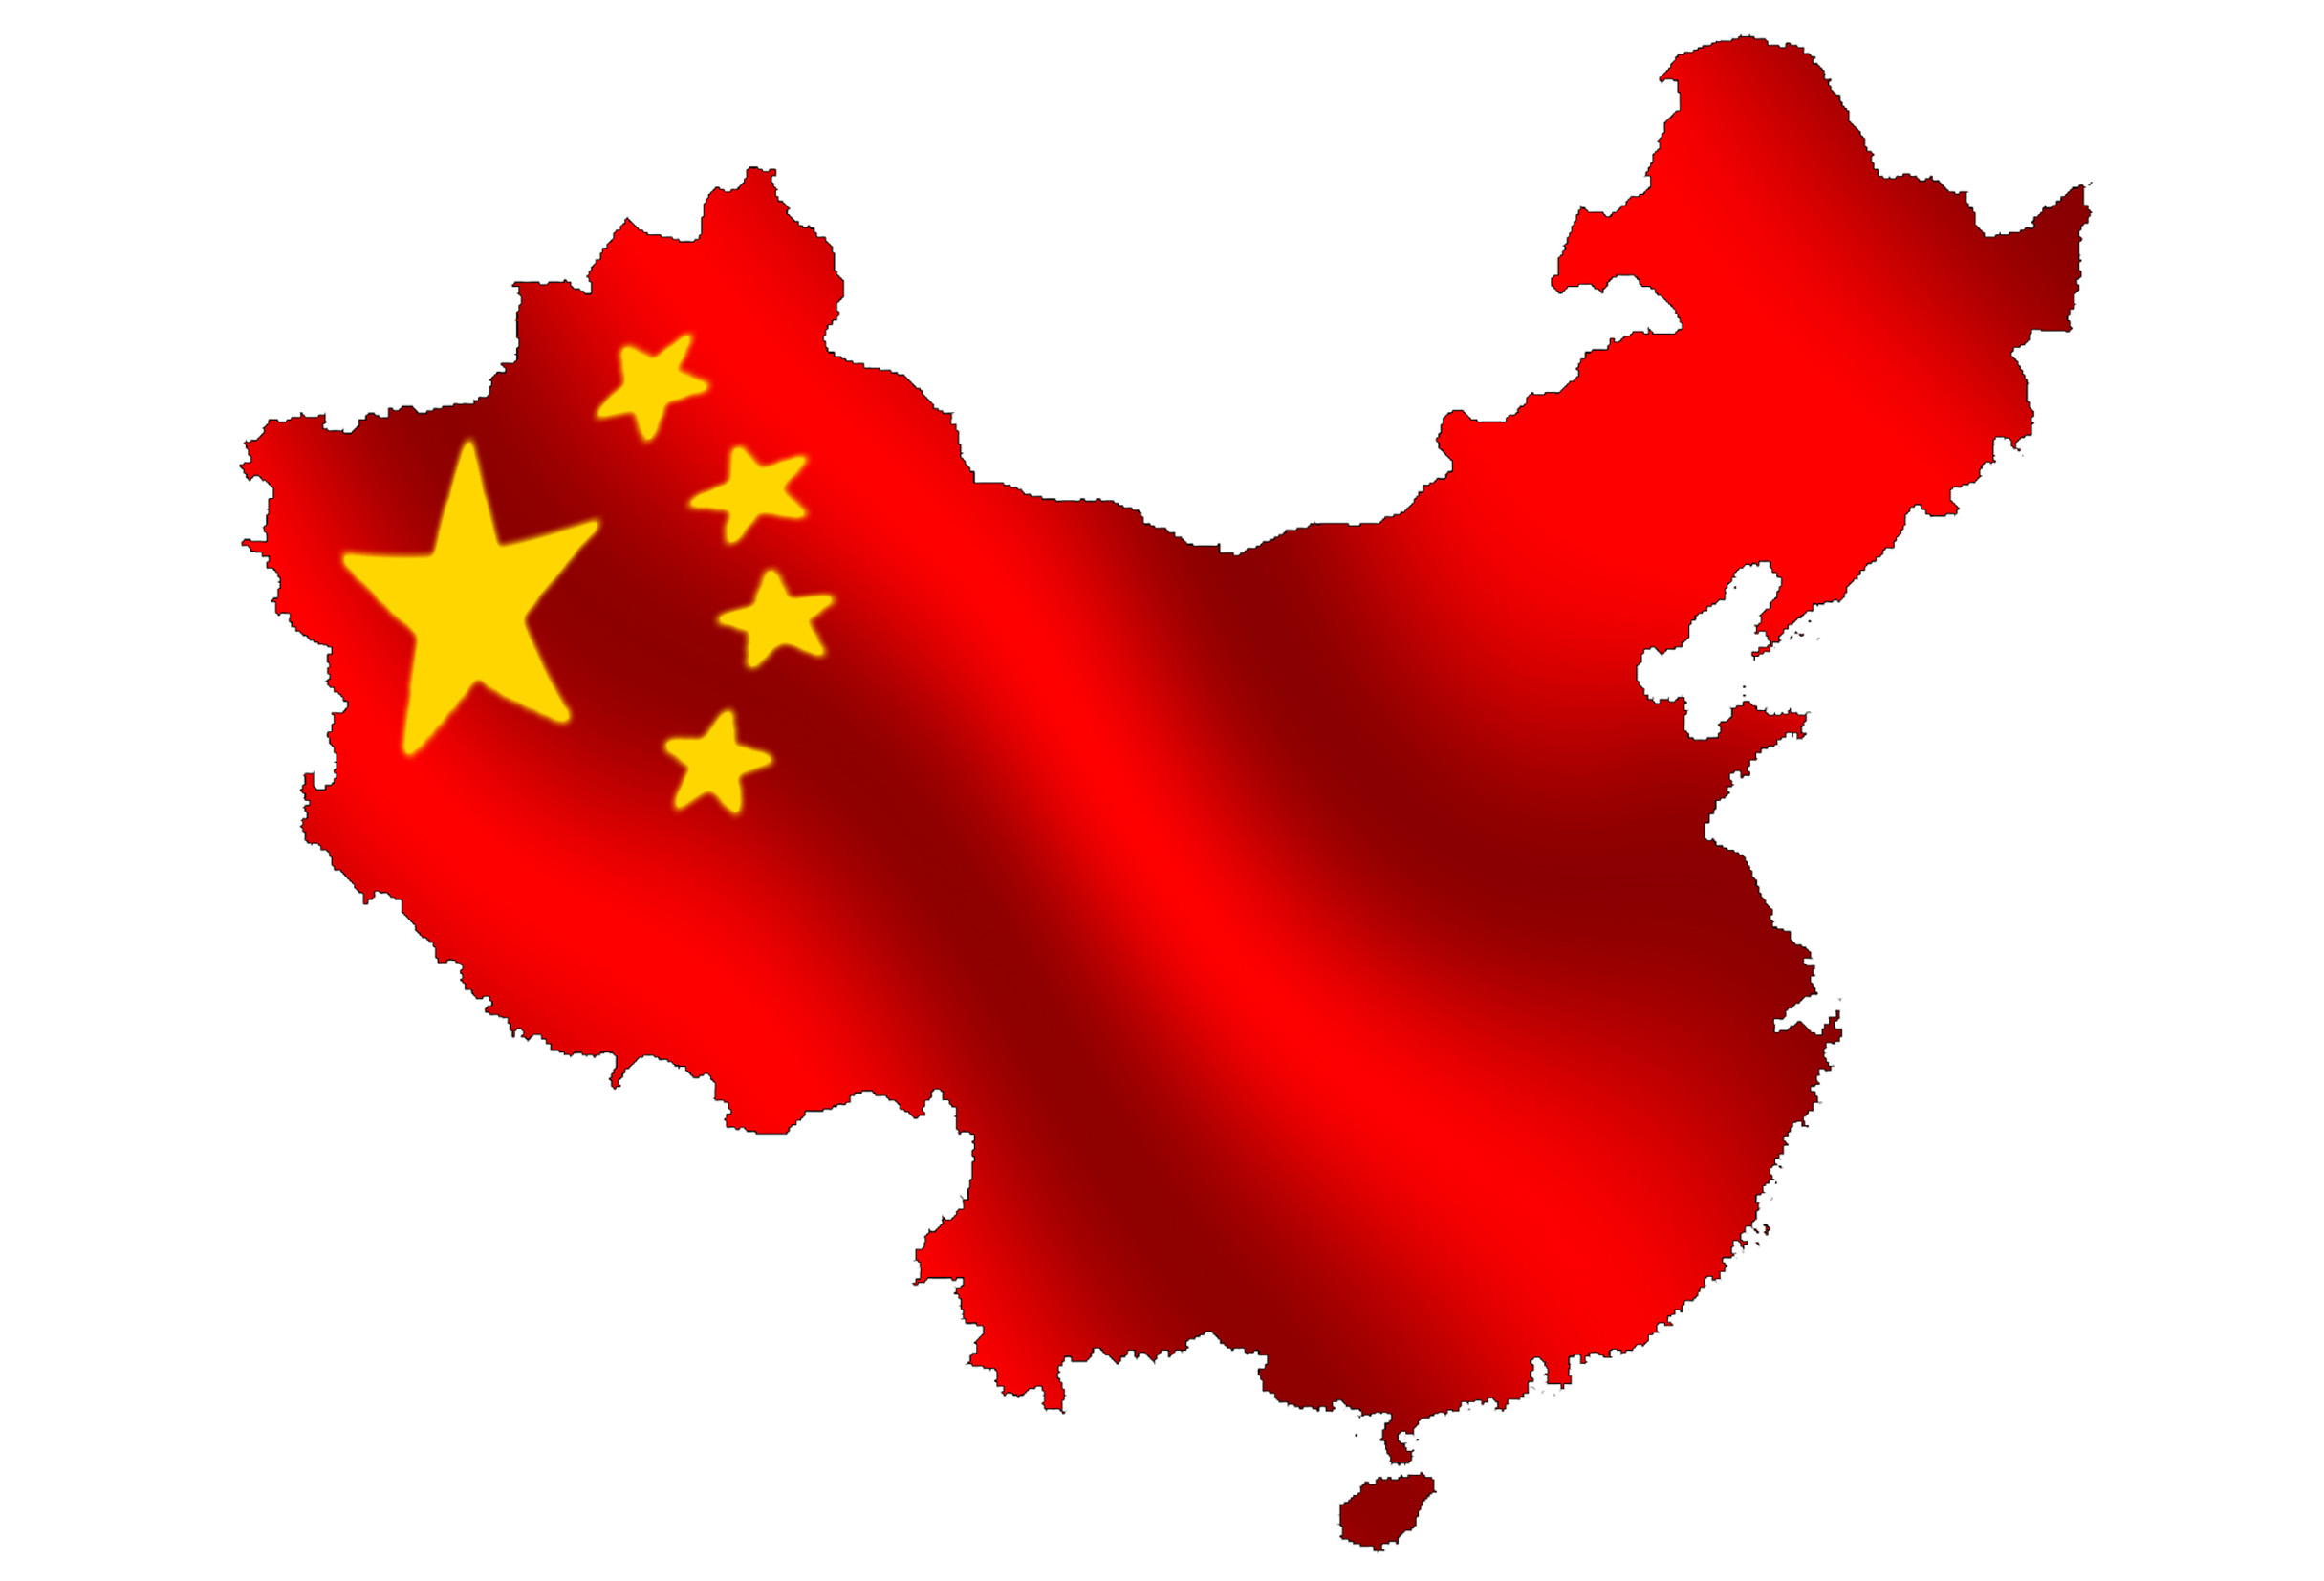 China forbids EU emissions payments - Aircargonews